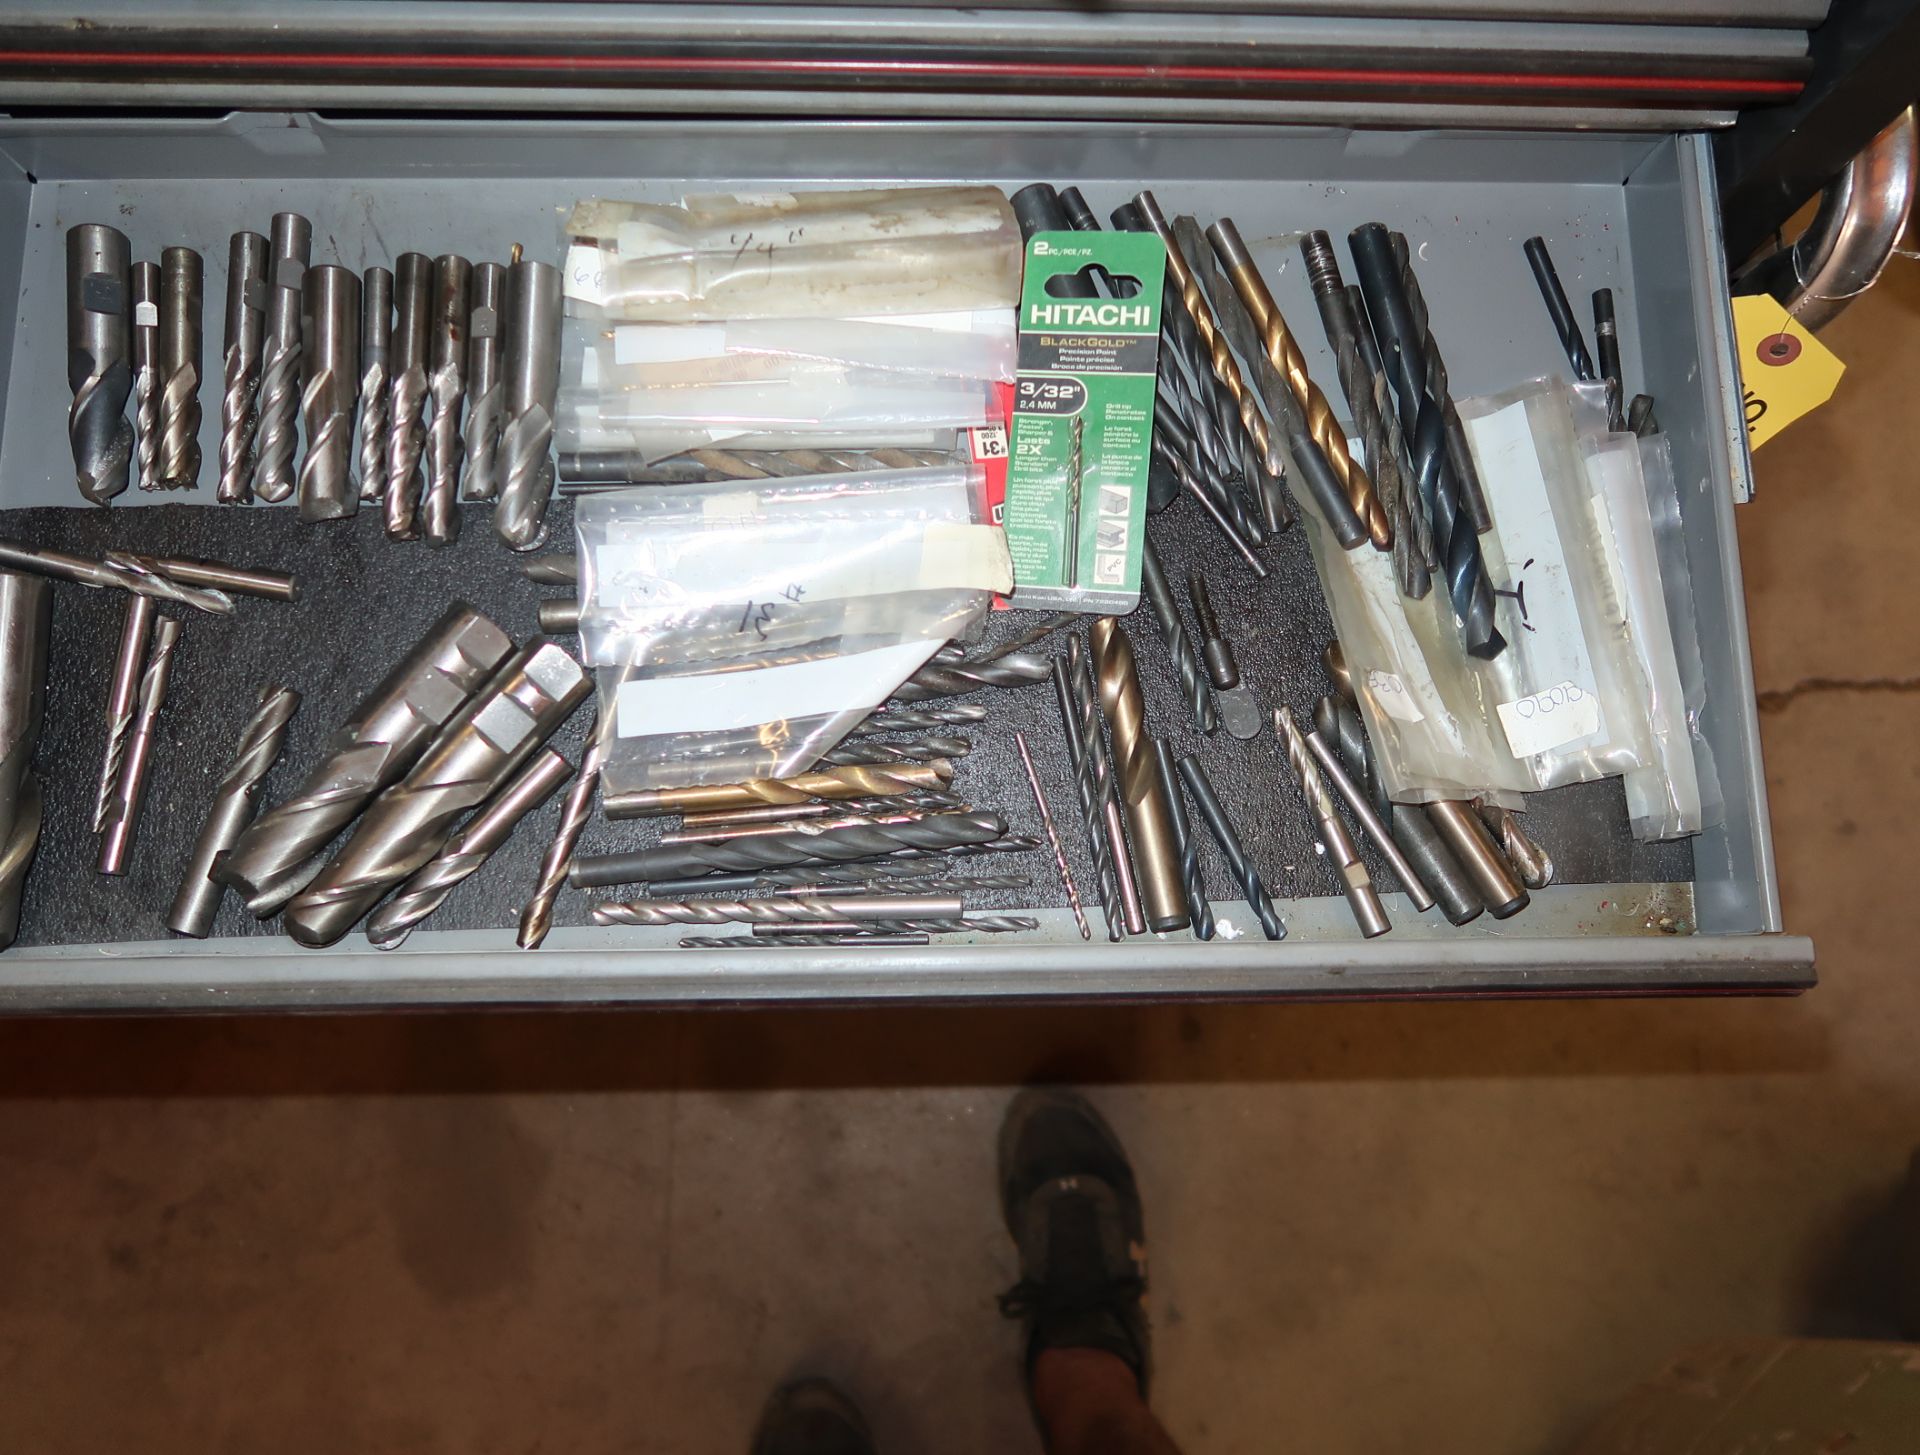 CRAFTSMAN TOOL BOX W/ CASTERS, ASST DRILL BITS, ETC - Image 3 of 5